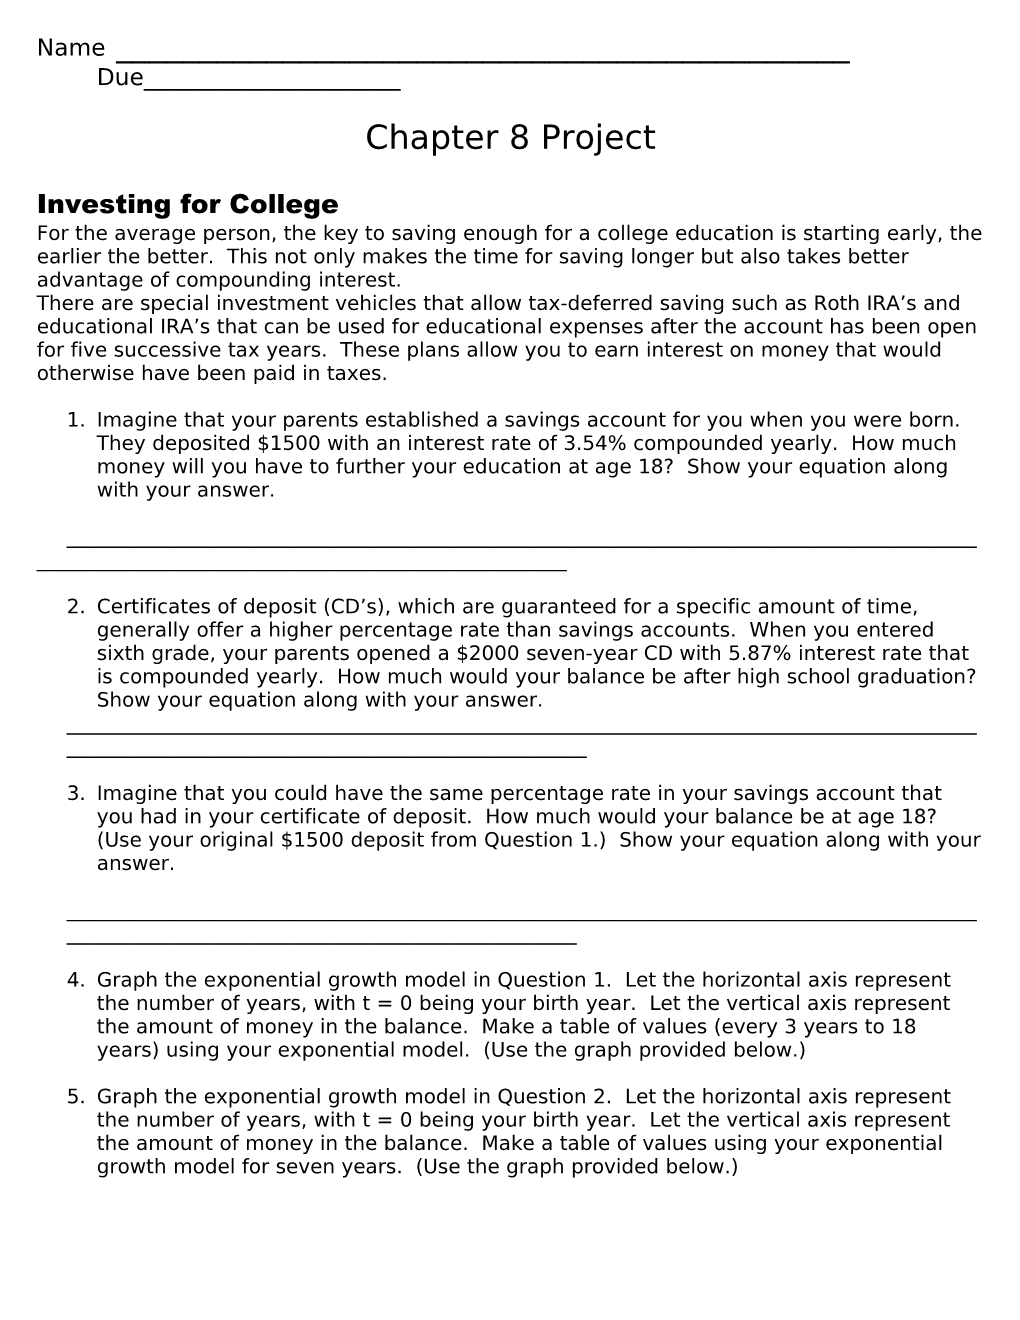 Investing for College